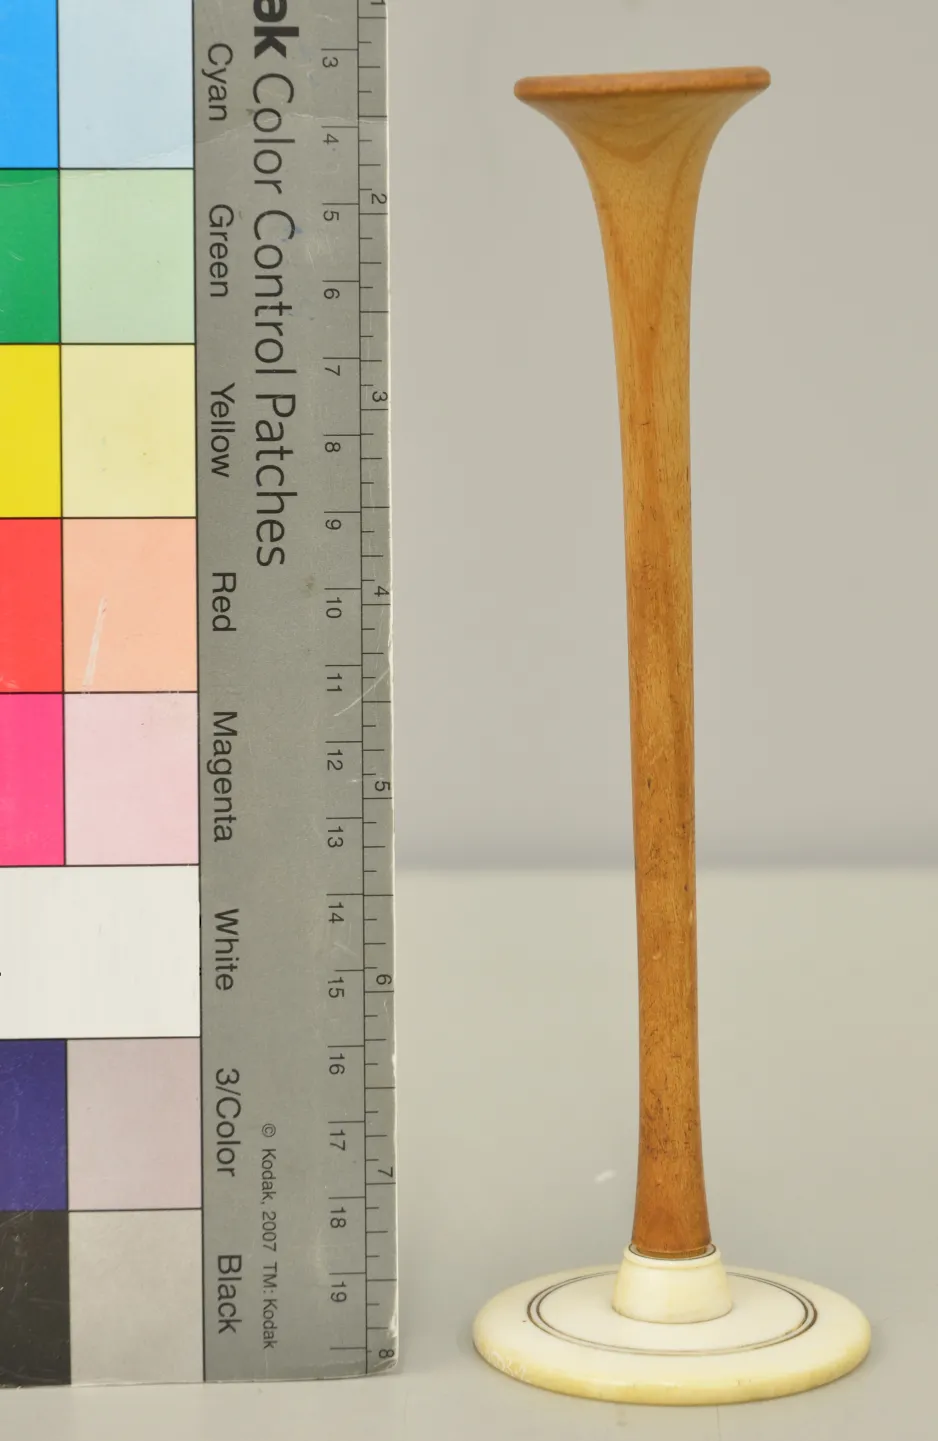 Delicate stethoscope made from a thin hollow piece of wood. Has a concave bell shape on one end and is attached to a flat disc made from bone or ivory on the other.